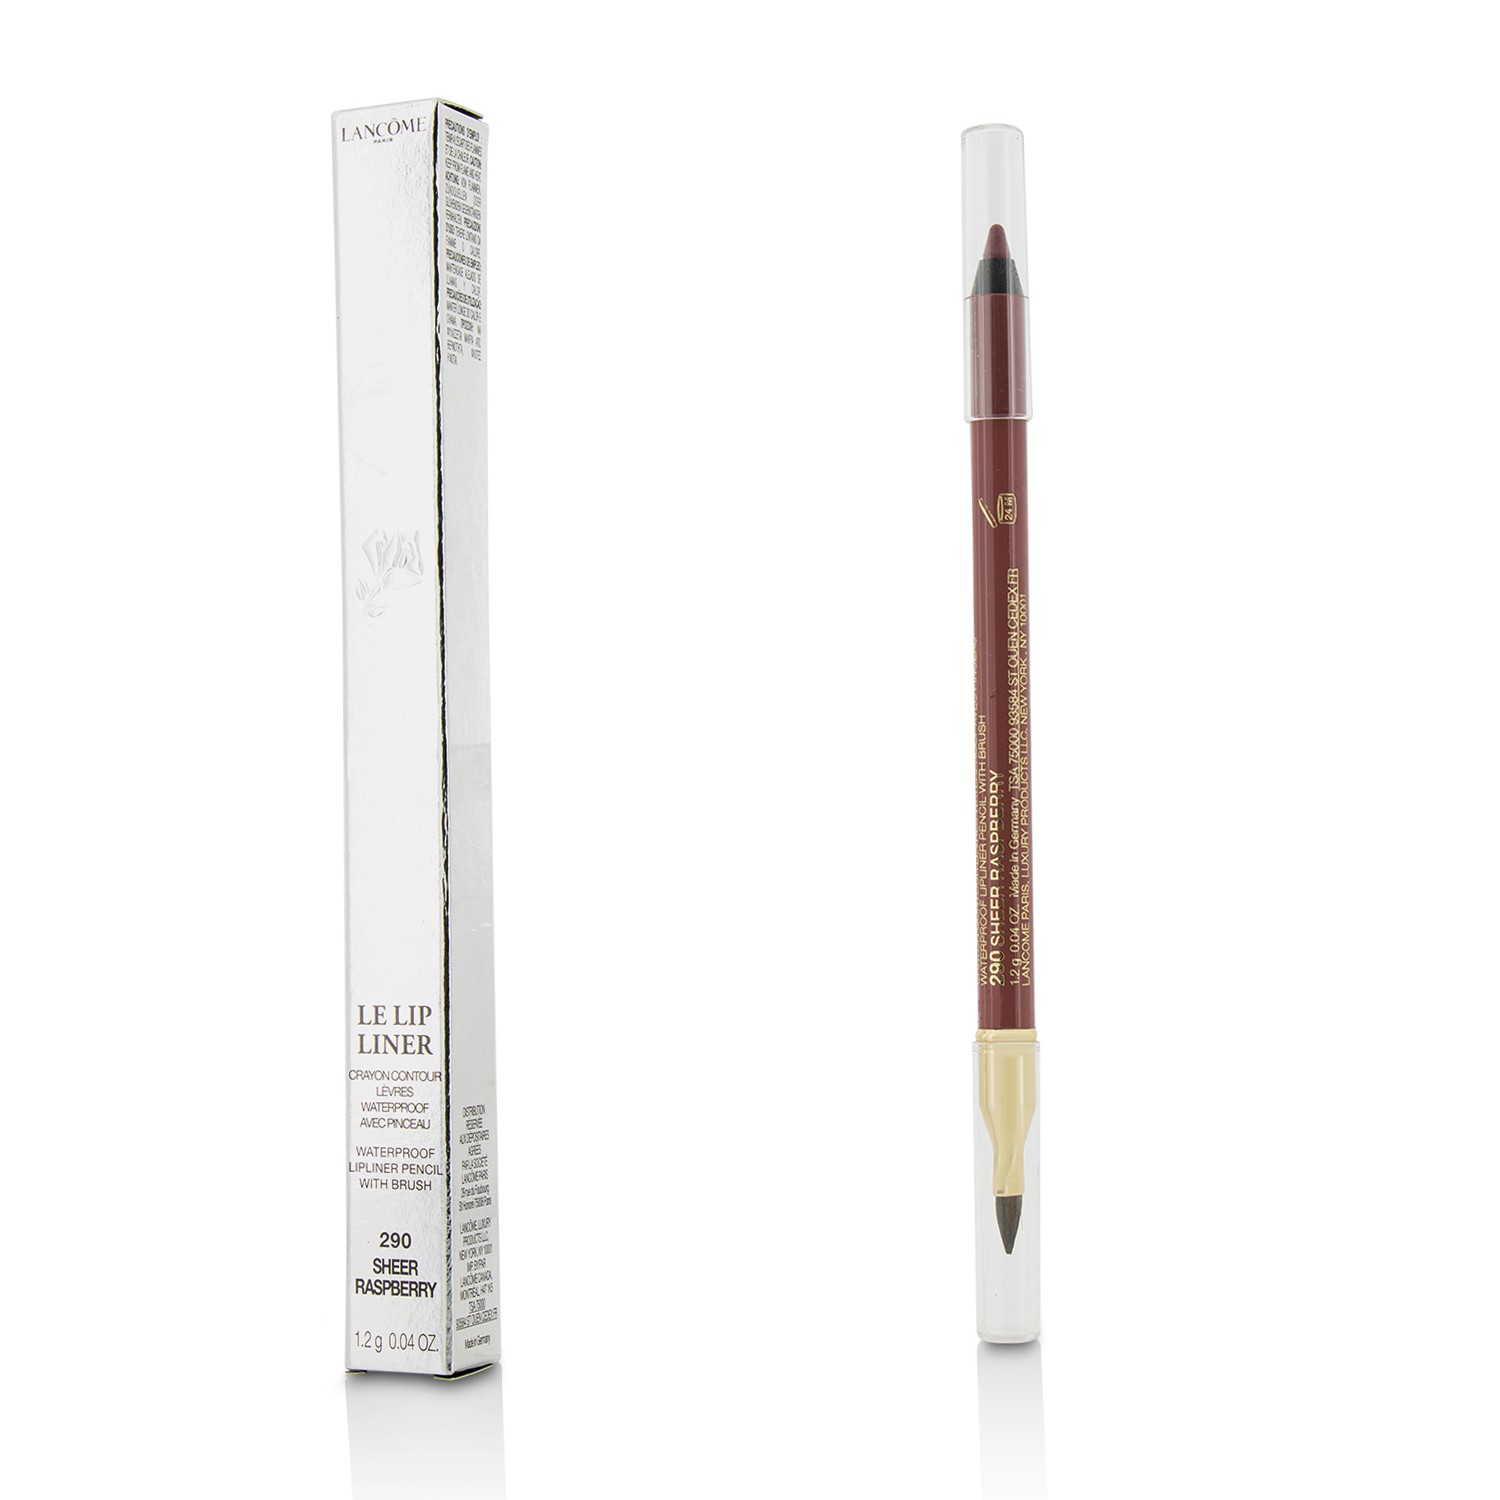 Le Lip Liner Waterproof Lip Pencil With Brush - #290 Sheer Raspberry Lancome Image